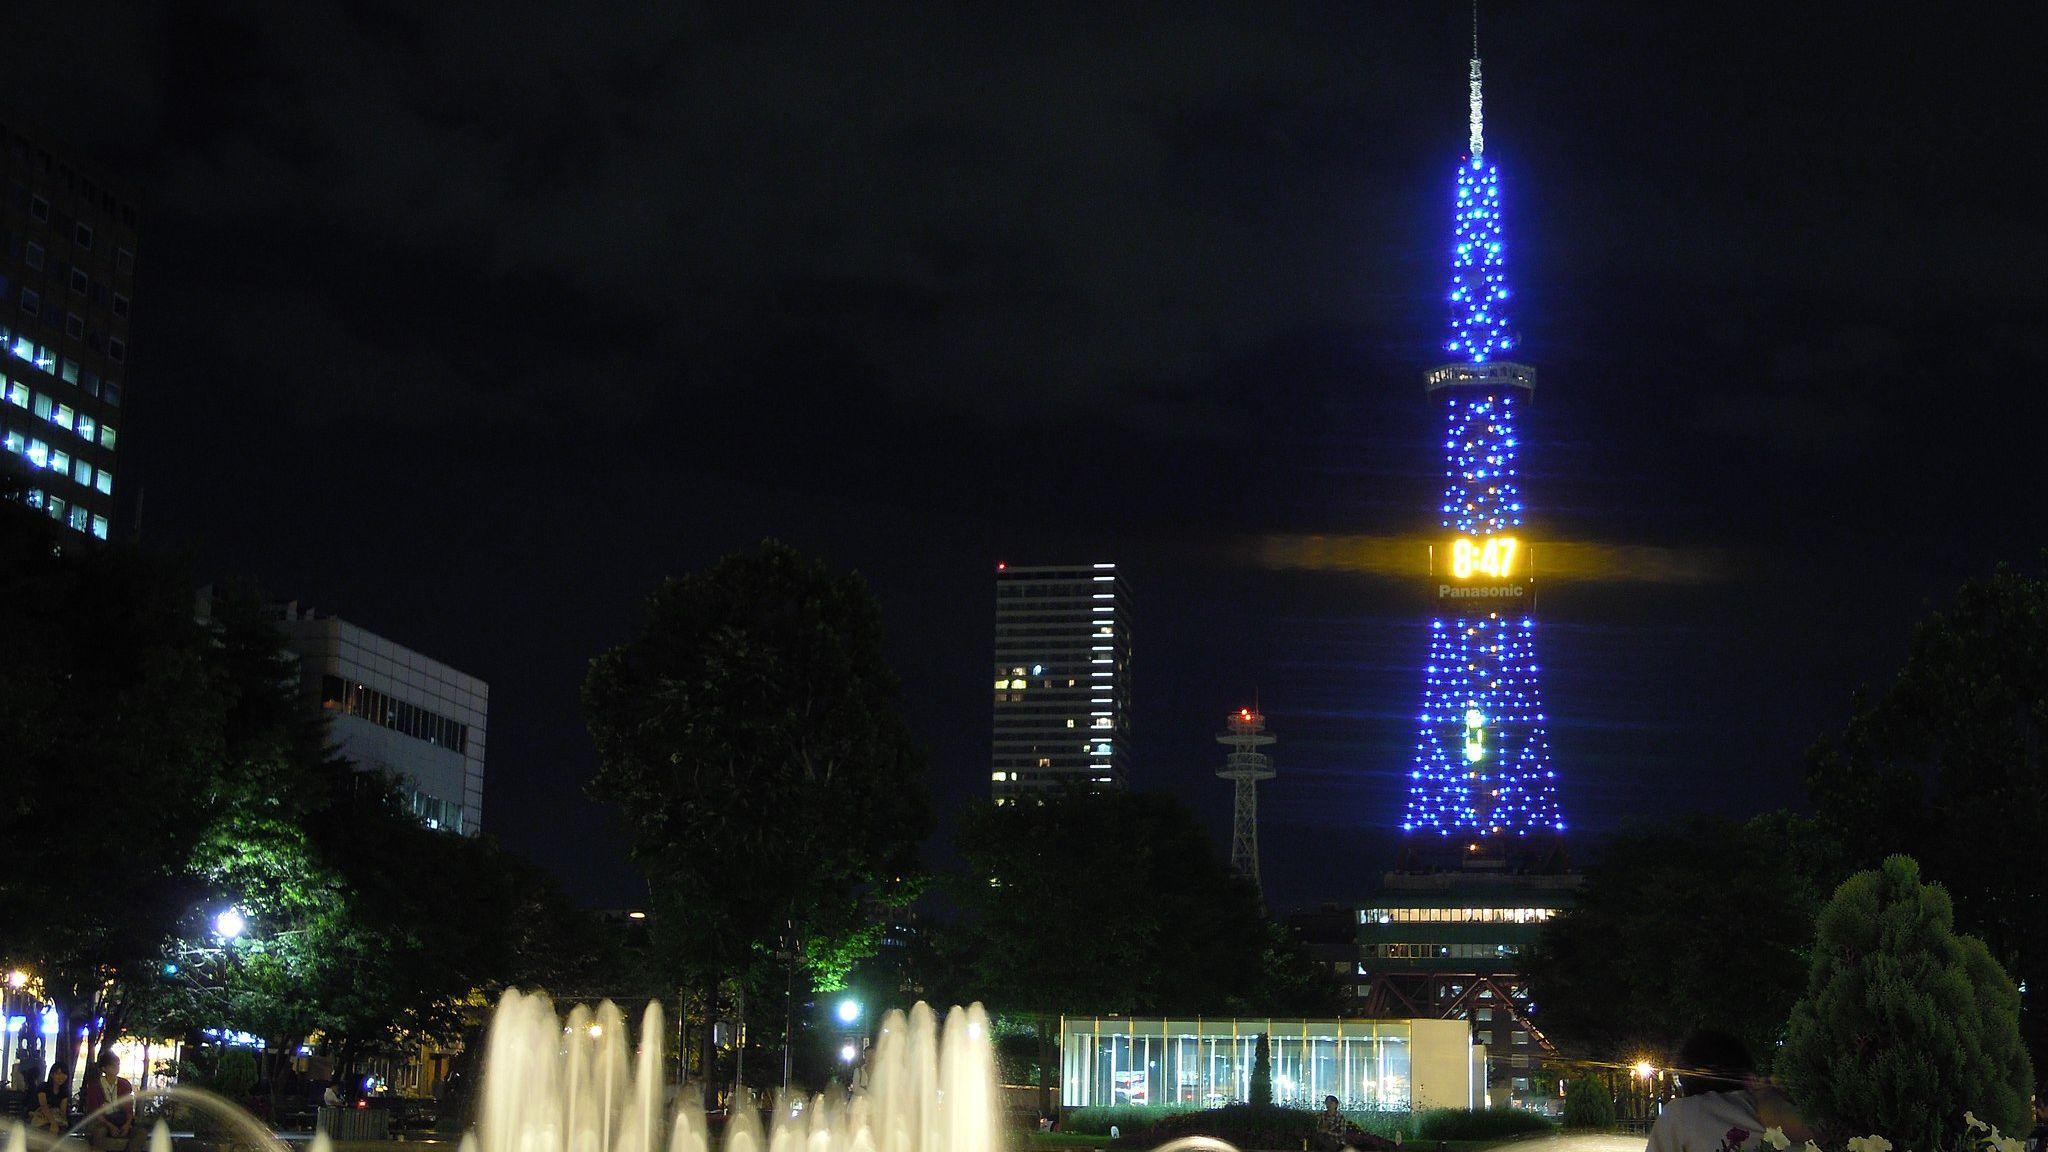 Sapporo TV Tower at night